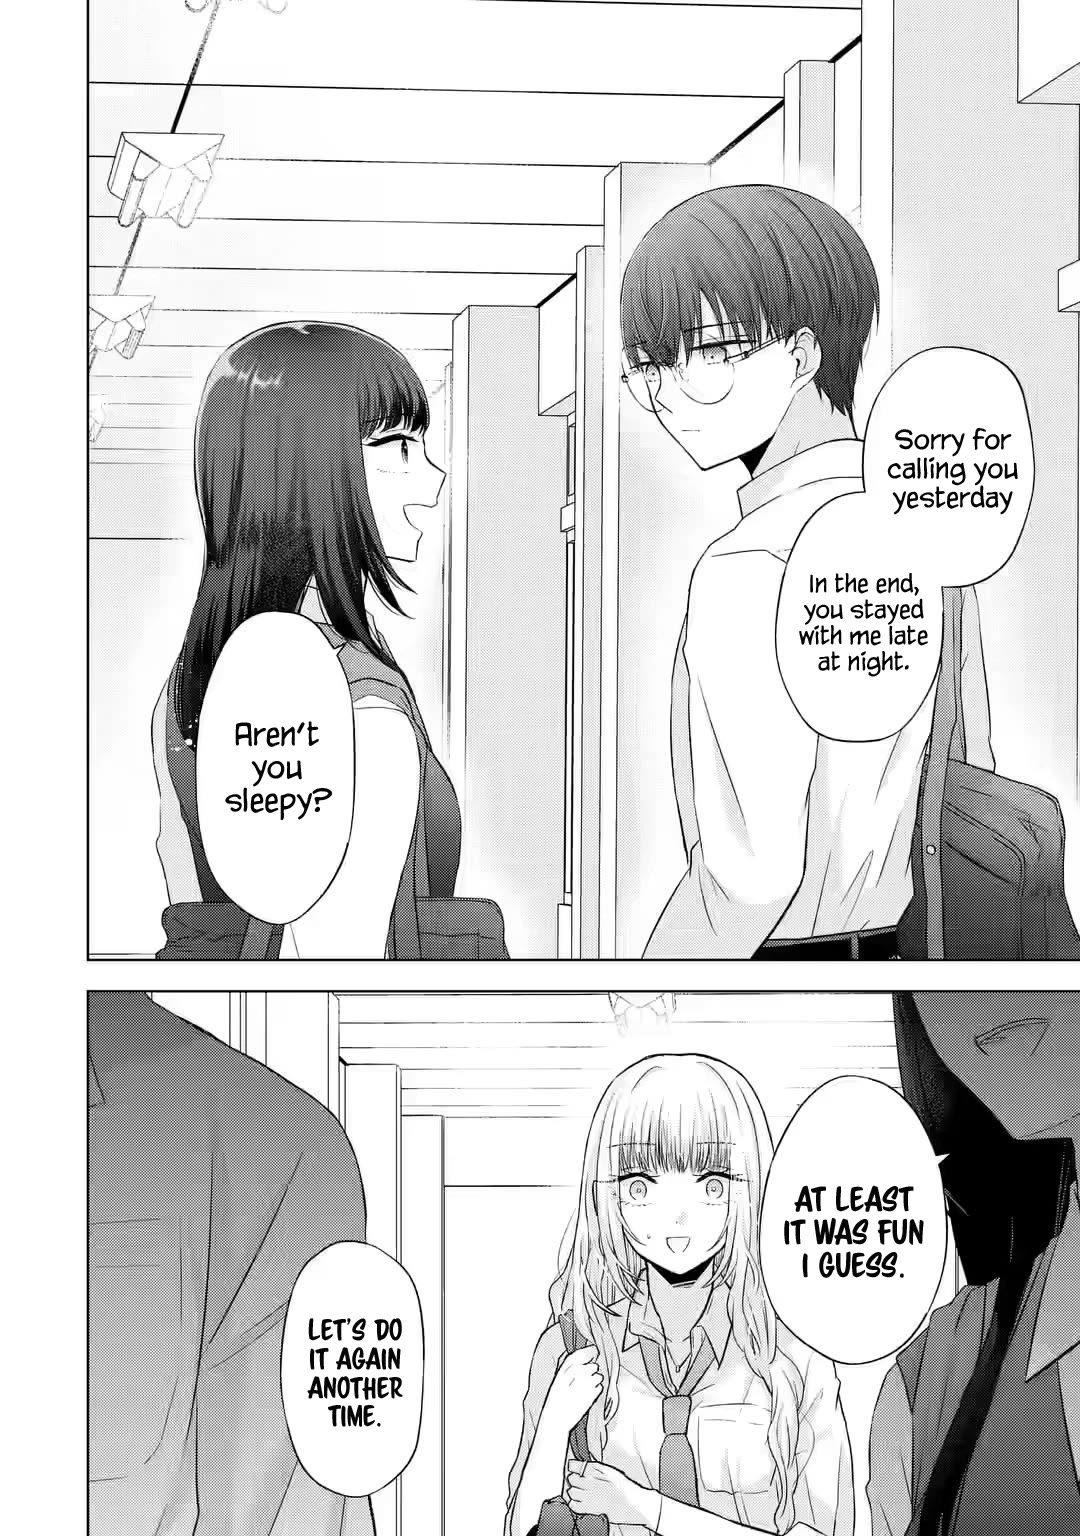 Nanjou-san Wants to Be Held by Me - chapter 5 - #2